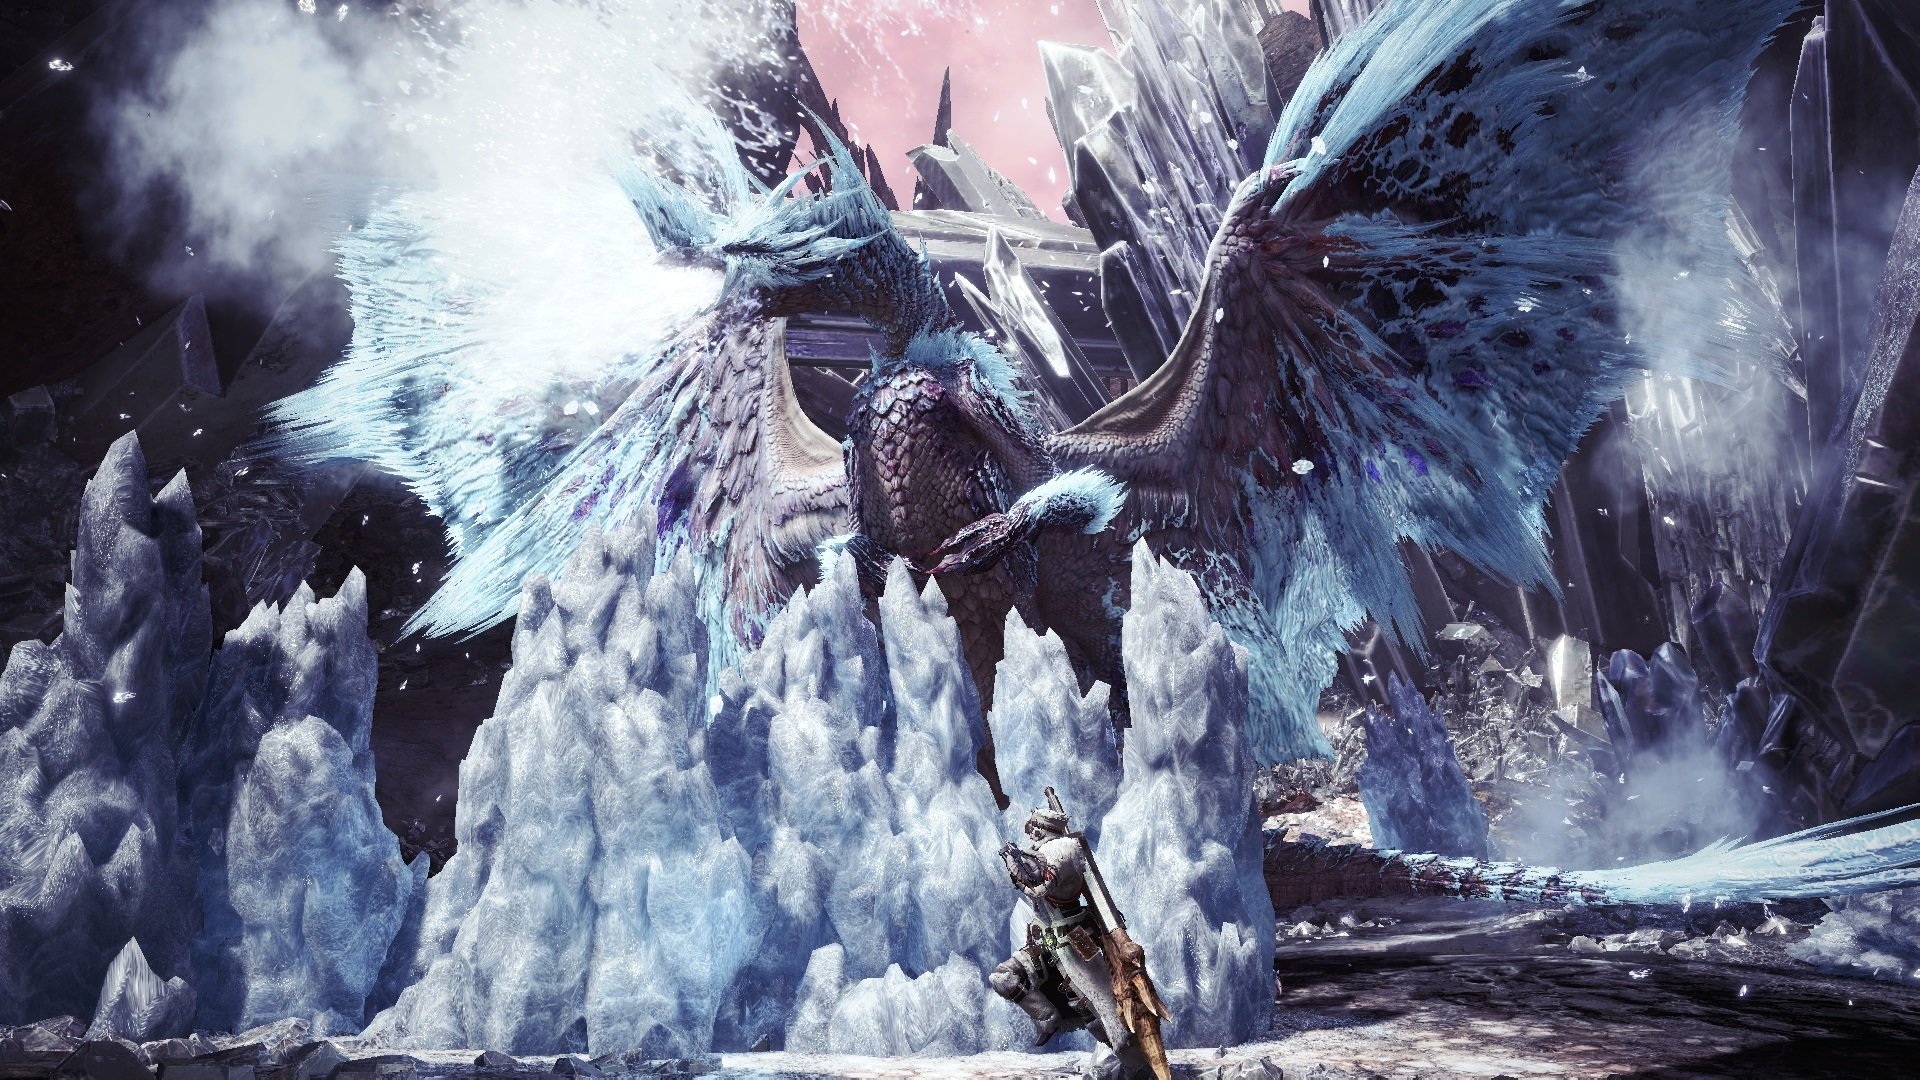 What to do after finishing Iceborne story?